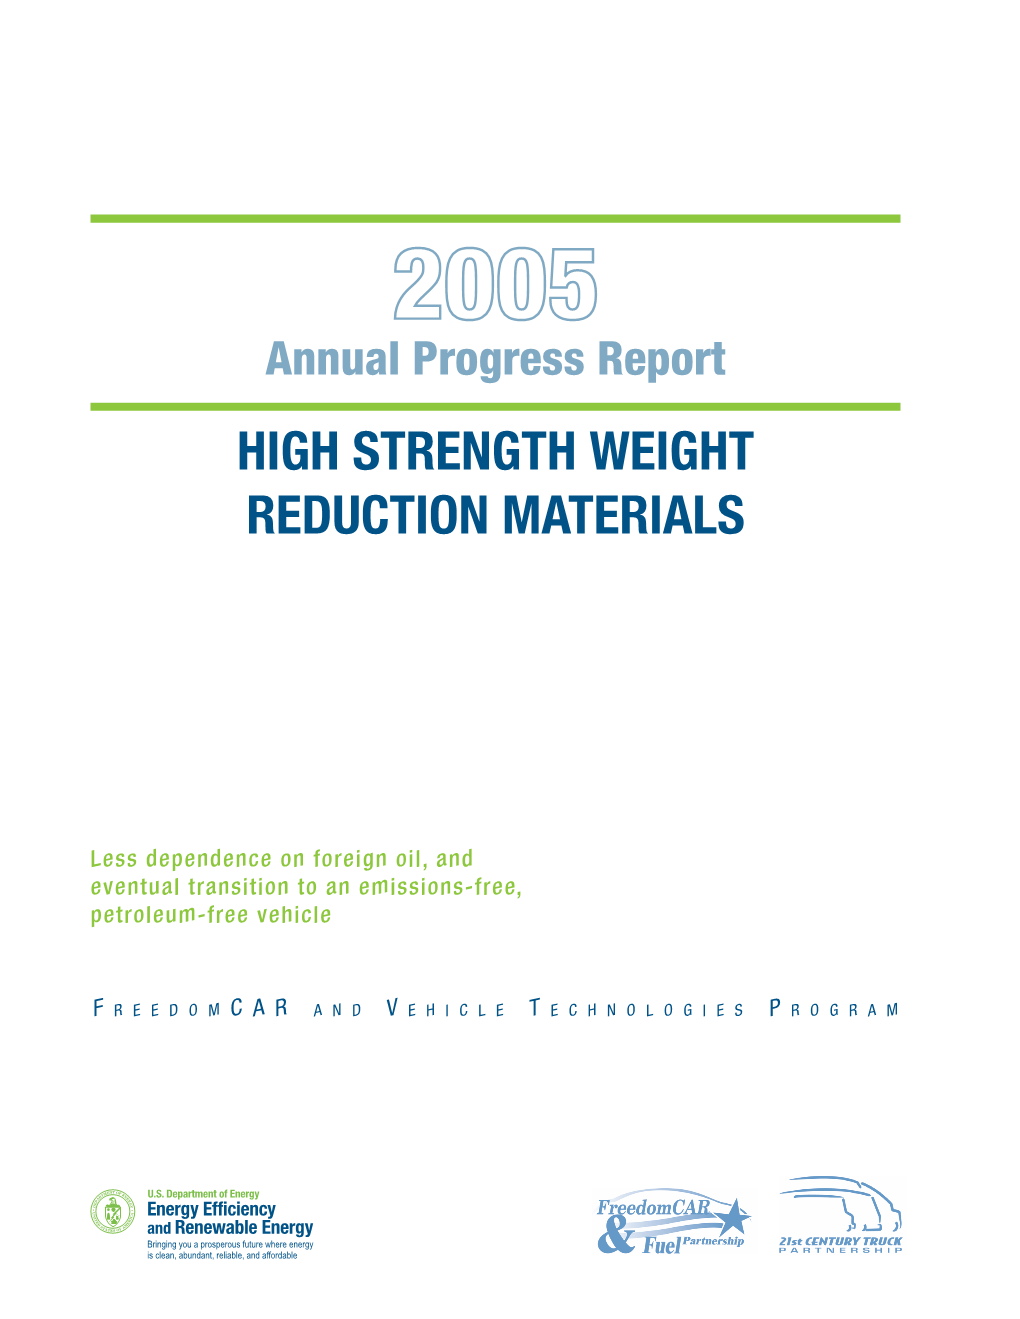 FY 2005 Progress Report for High Strength Weight Reduction Materials